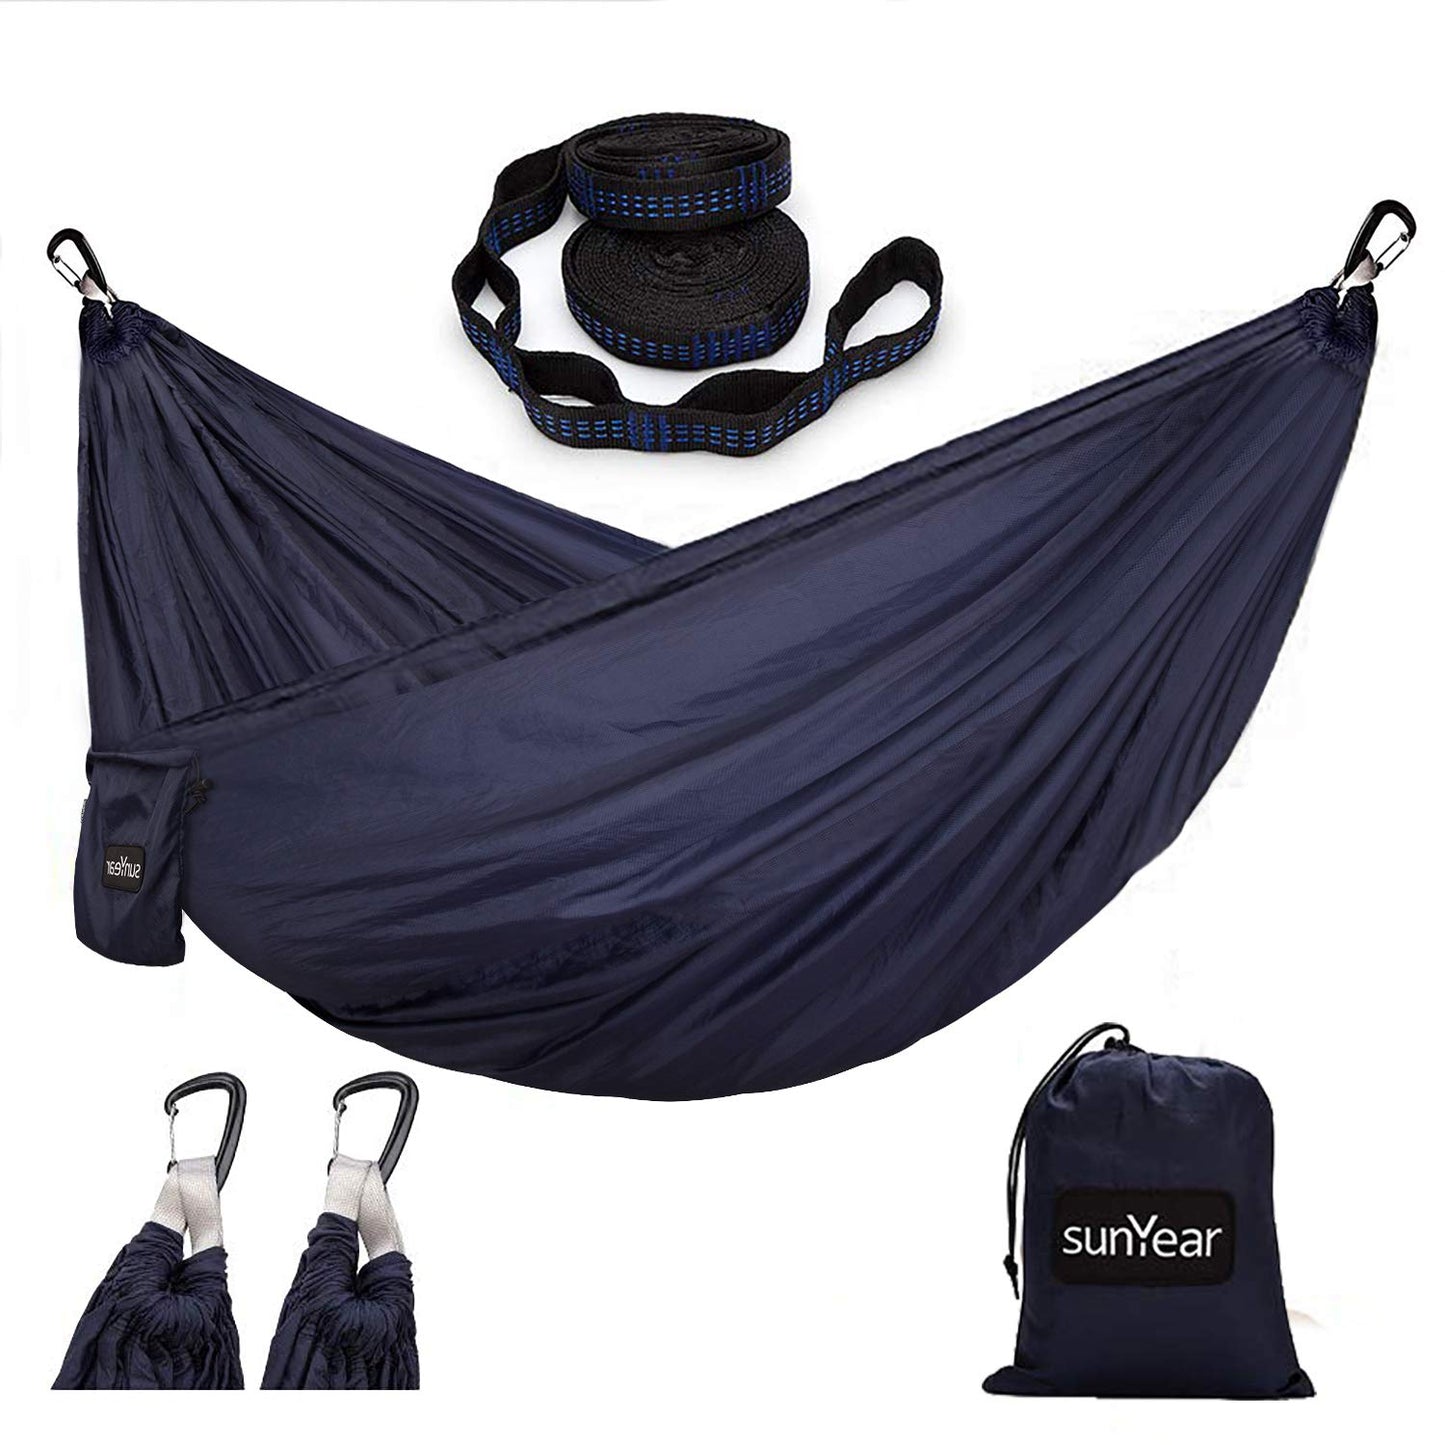 Nylon Camping Hammock with Tree Straps and Carabiner Clips - Sunyear